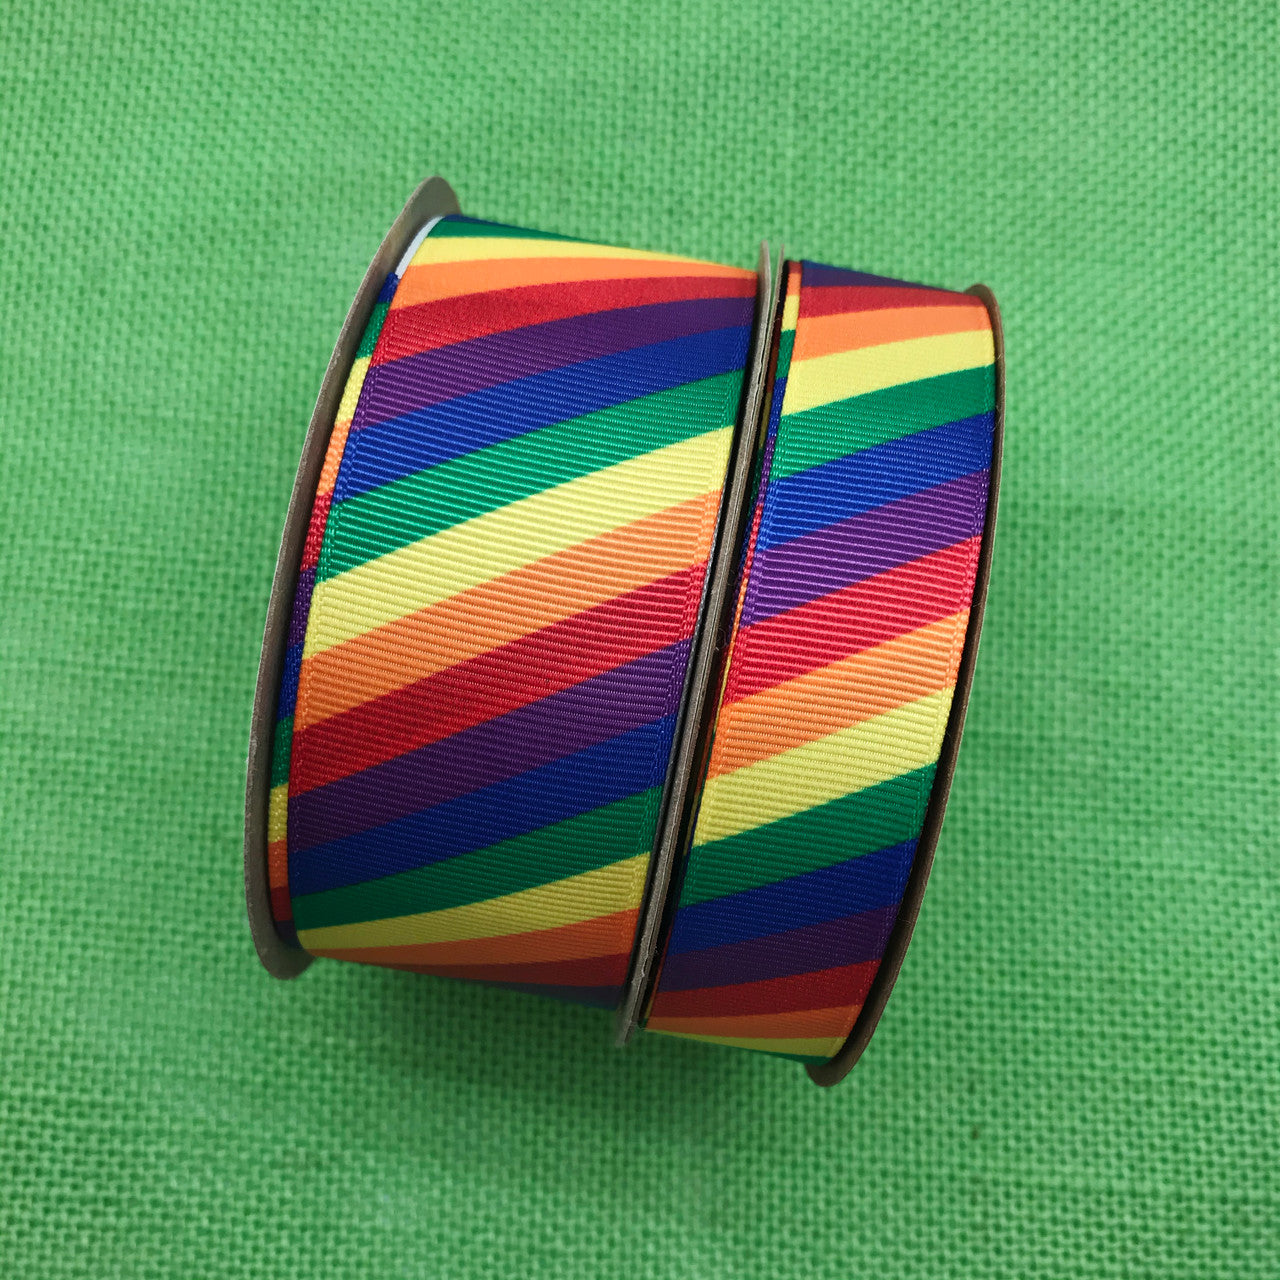 Our rainbow stripes in primary colors come in two sizes for your crafting projects large and small. We offer this grosgrain ribbon in 1.5" and 7/8" widths.